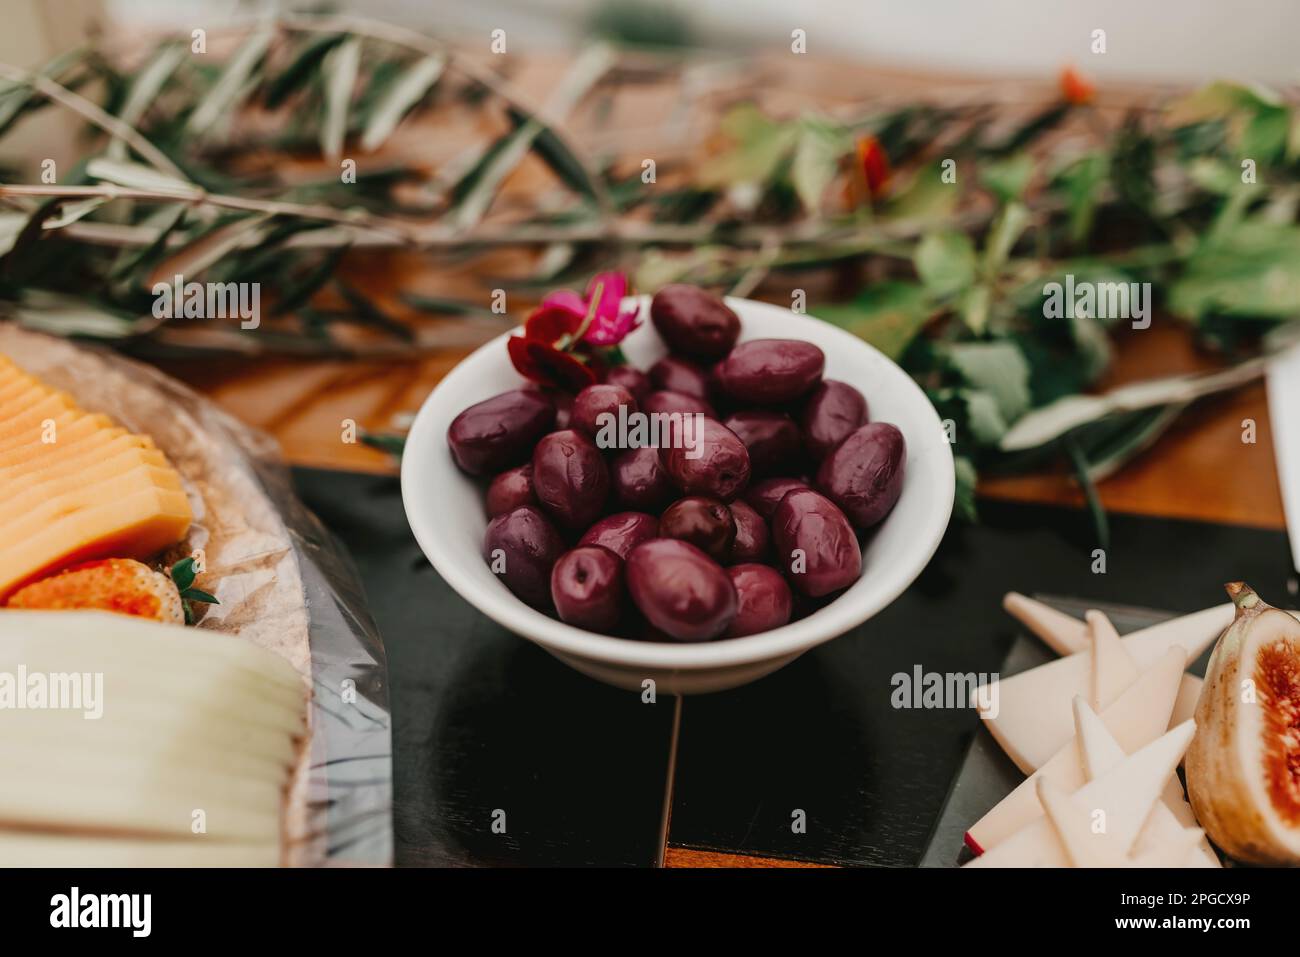 A rustic wooden table displays a variety of snacks, including a plate of juicy grapes, freshly baked bread, and small figurines Stock Photo